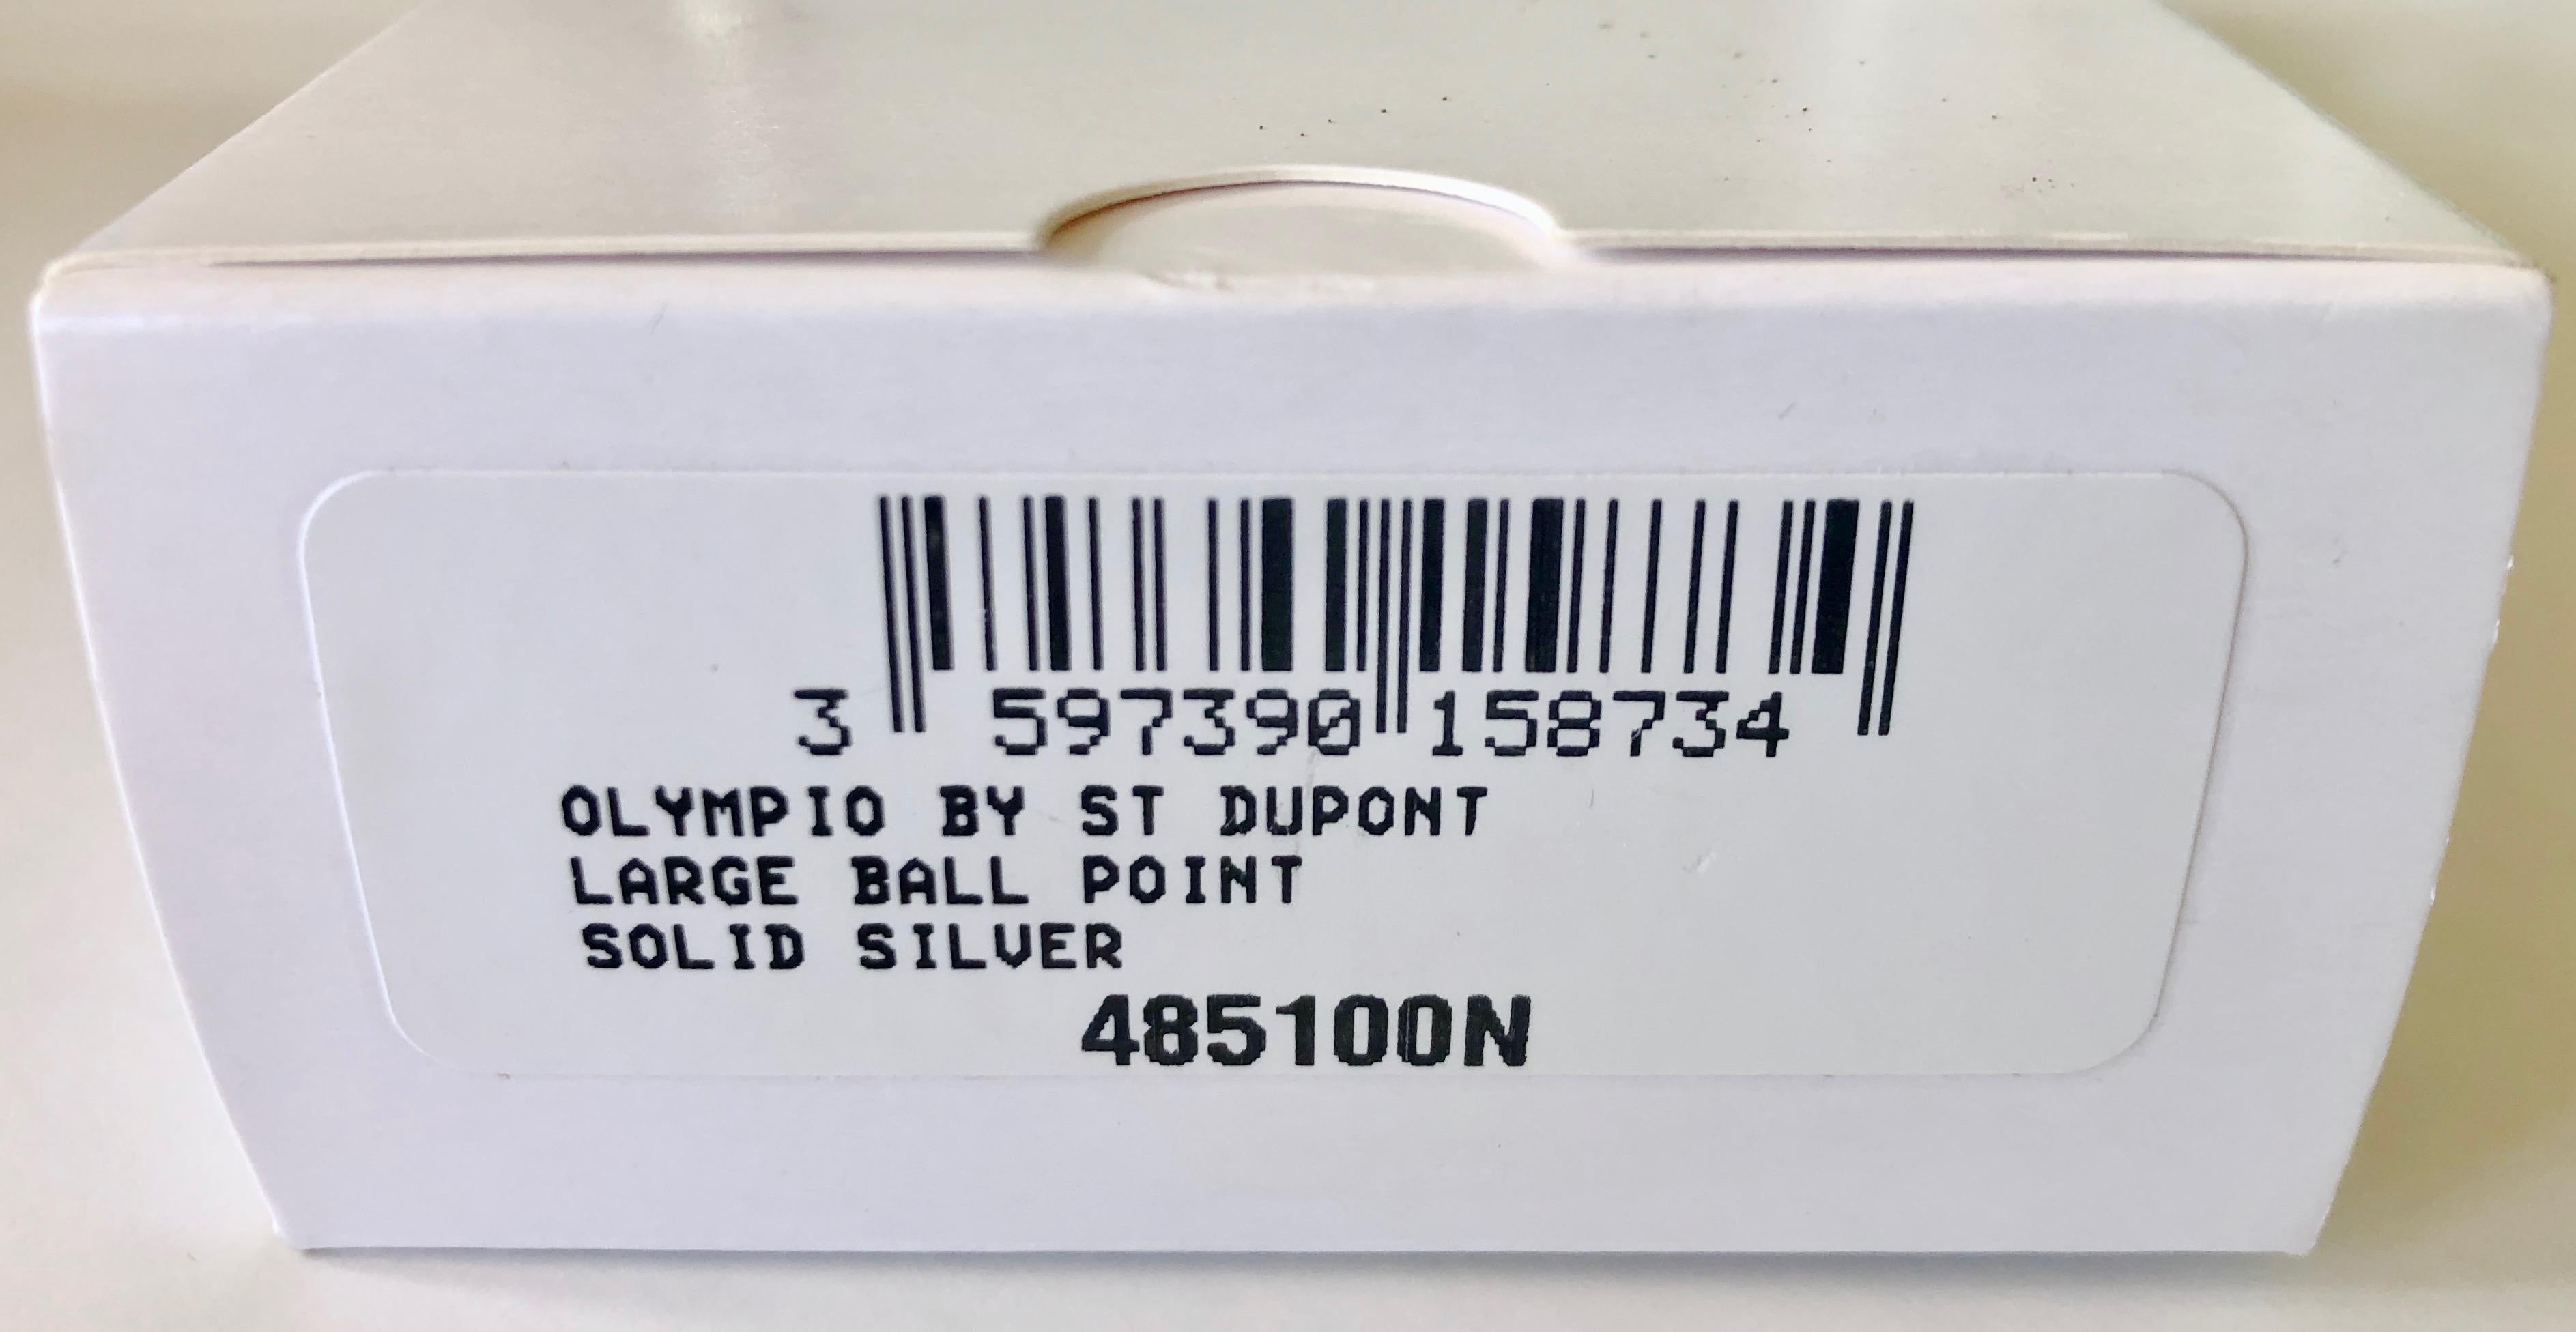 S.T. Dupont Paris Olympio Brand New Large Solid Silver Ball Point Pen in Box For Sale 3